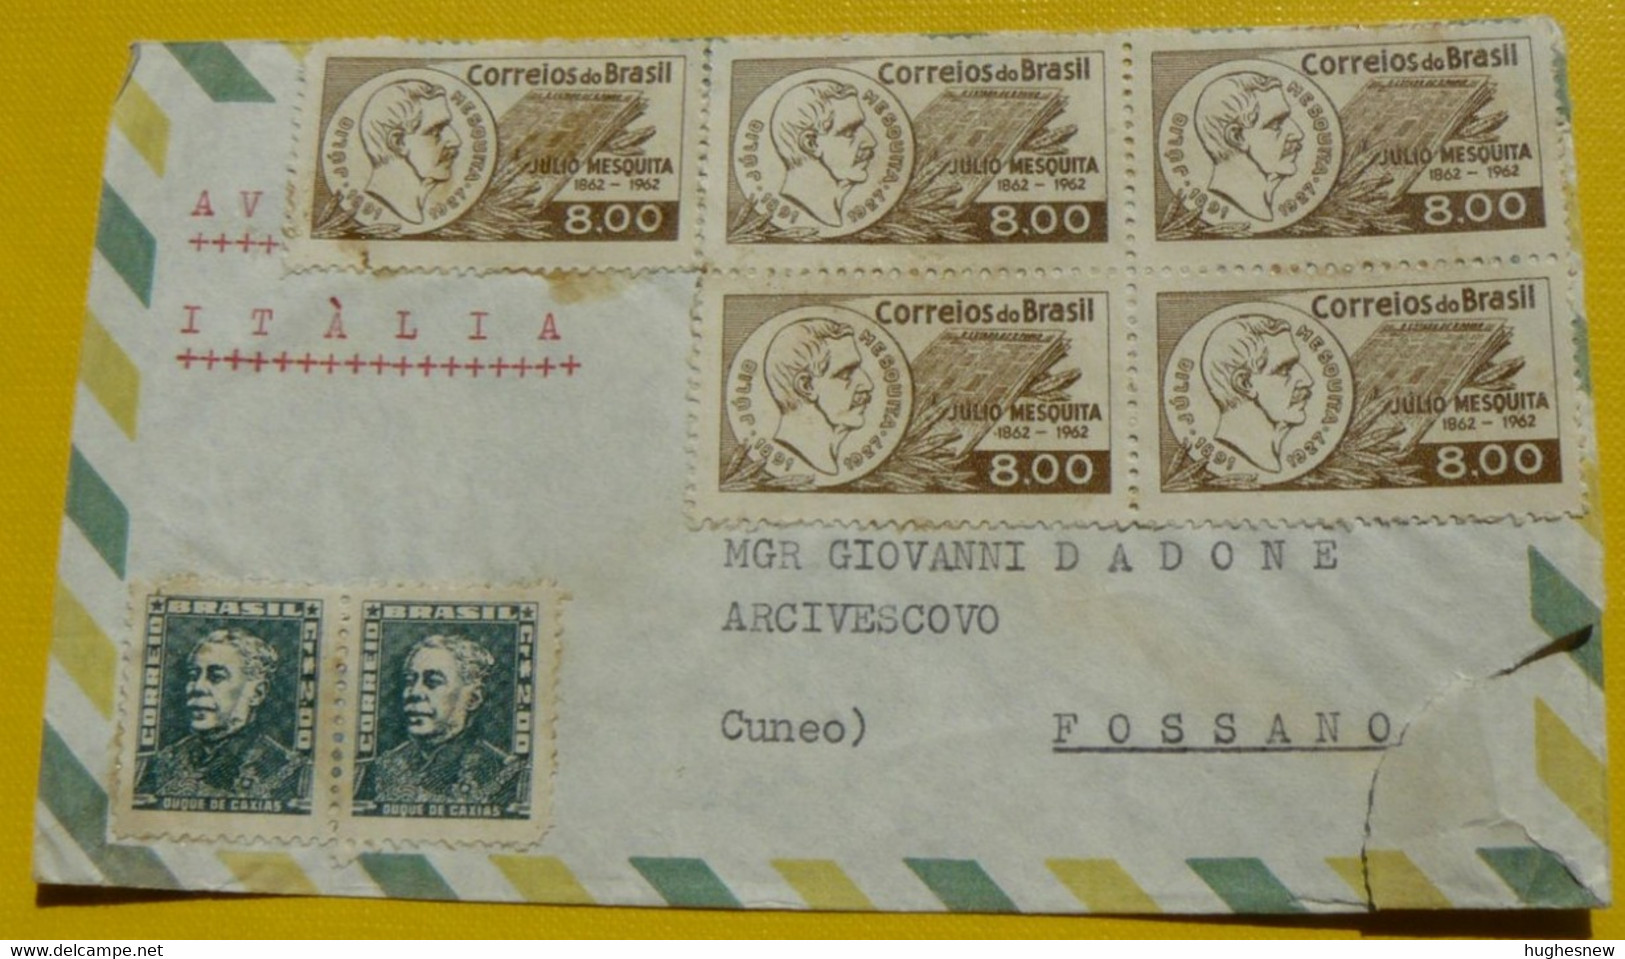 BRAZIL 1964 _ ENVELOPE  LETTER + 7 BEAUTIFUL  STAMPS  NOT STAMPED,  TRAVELED  TO  BISHOP  OF  FOSSANO - CUNEO  ( ITALY ) - Cartas & Documentos